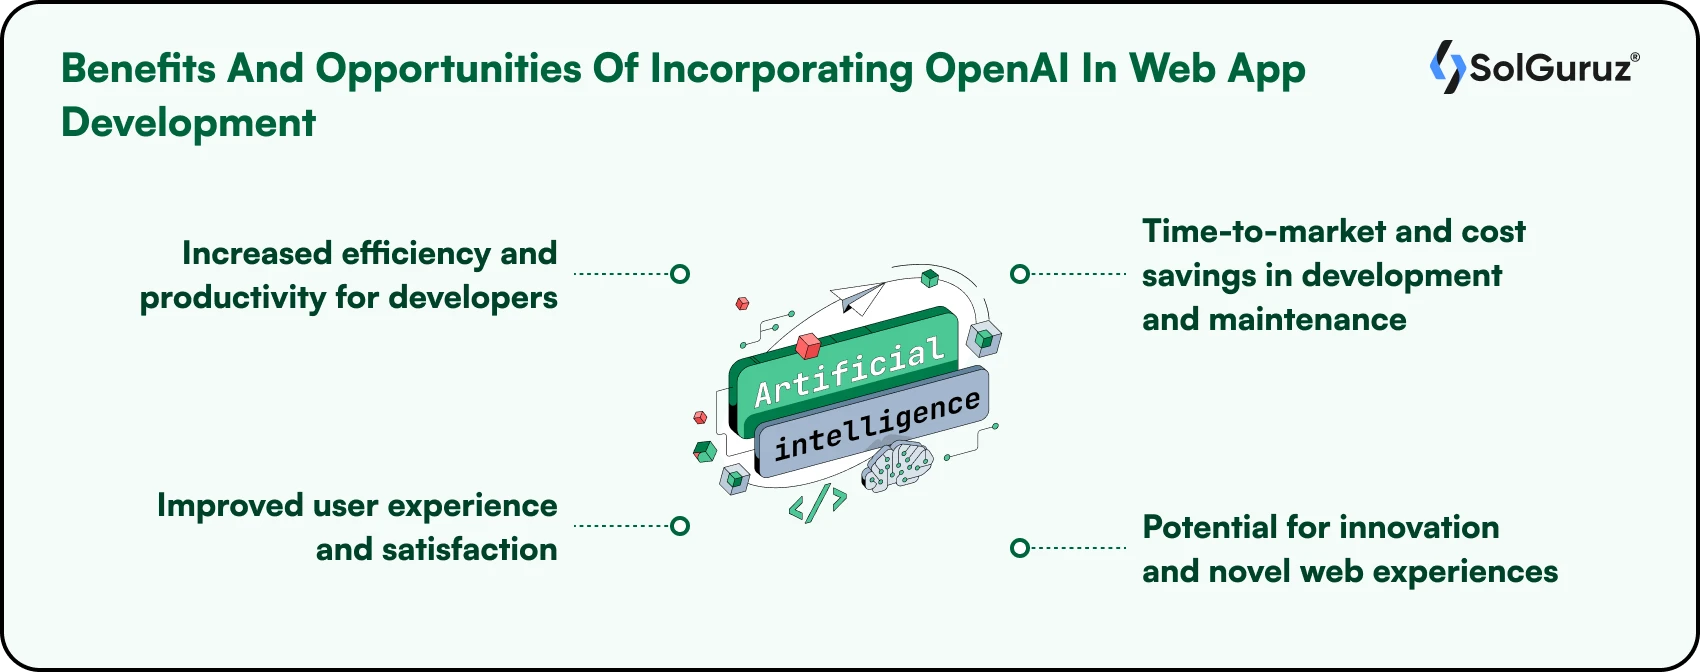 Benefits And Opportunities Of Incorporating OpenAI In Web App Development